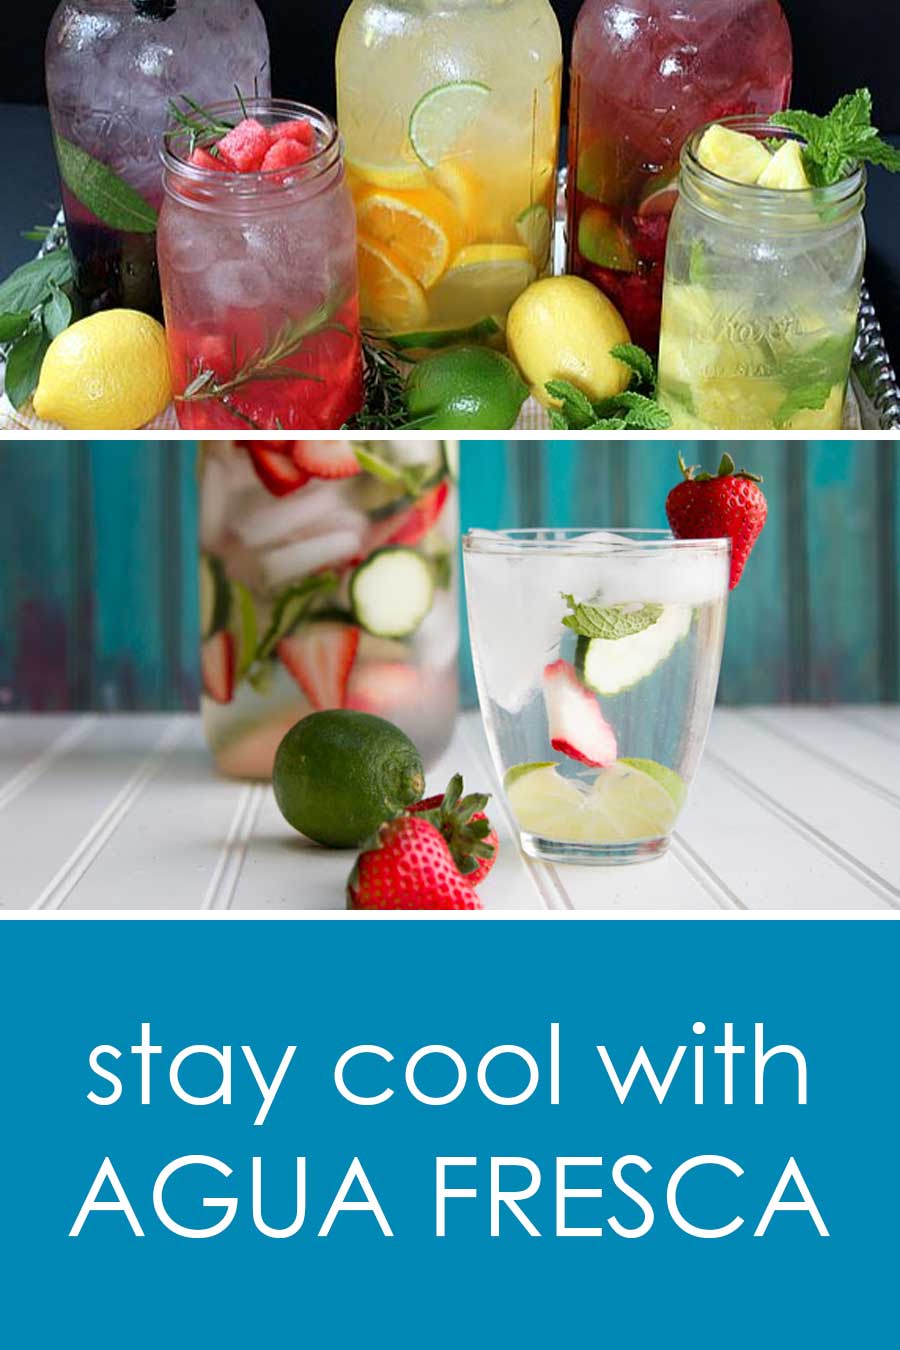 Agua fresca recipes to keep you cool and hydrated